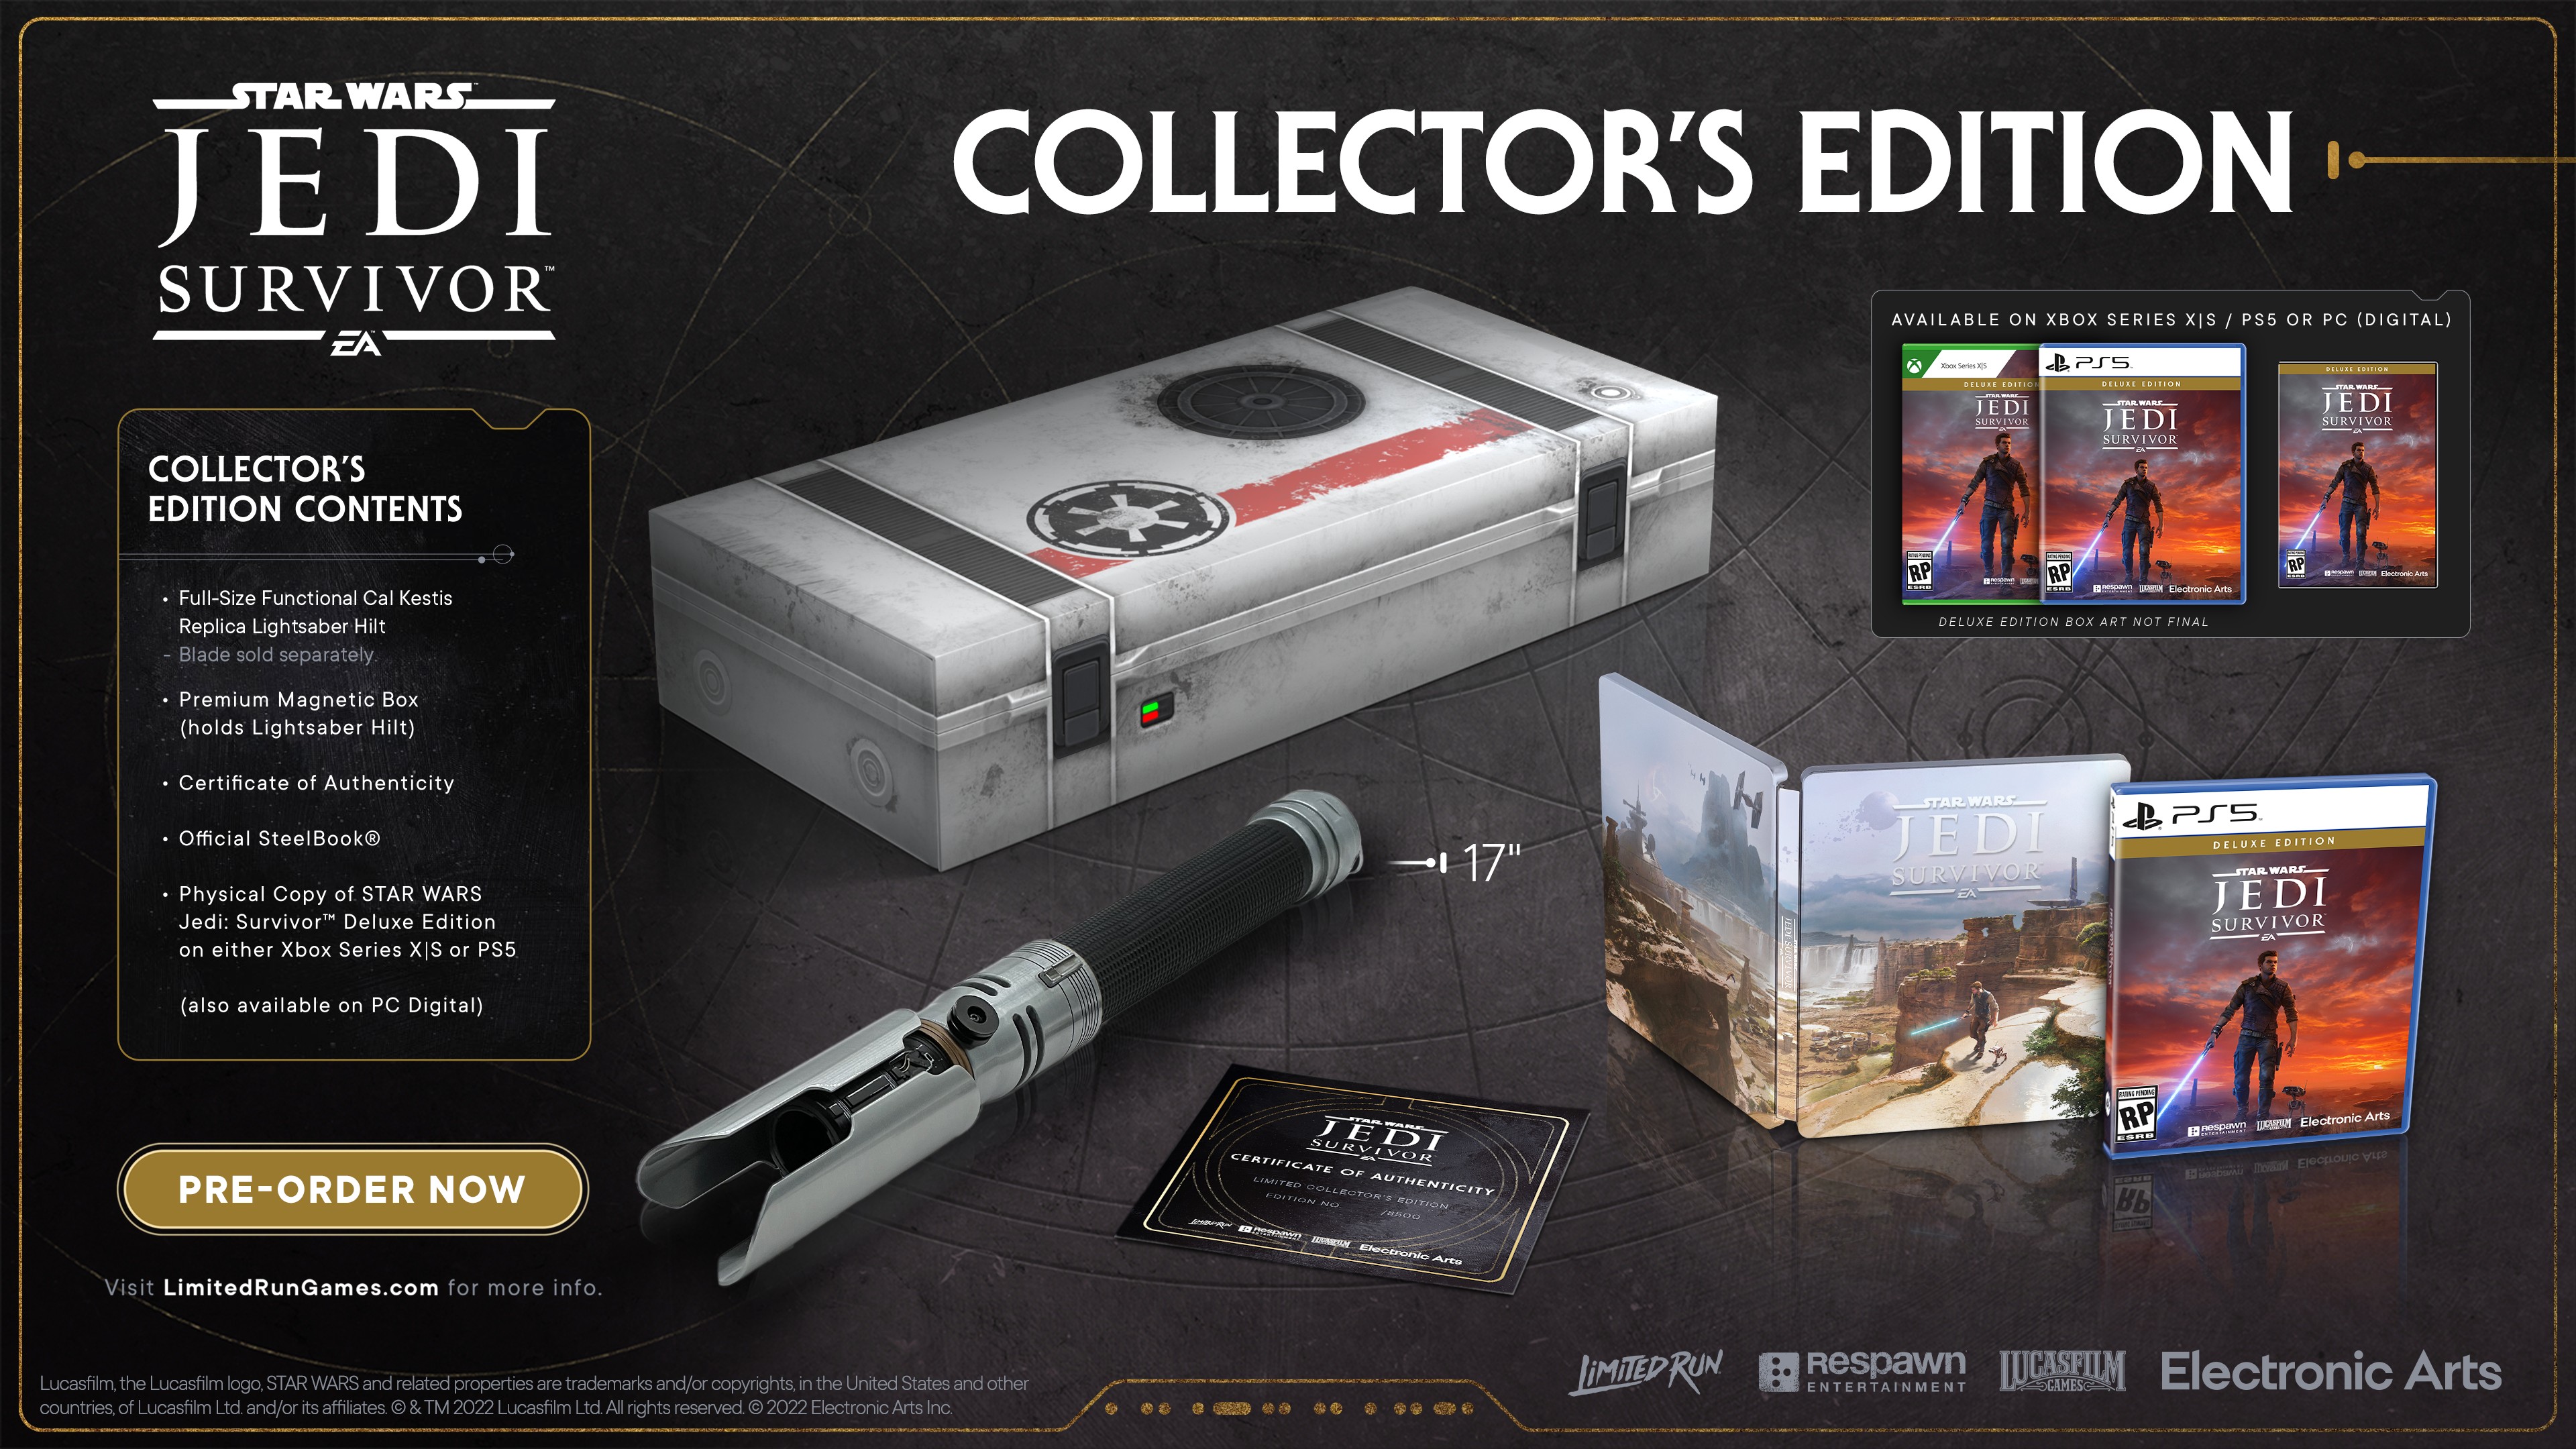 (The Collectors Edition costs 300 Euros, but is already completely sold out in the store.)